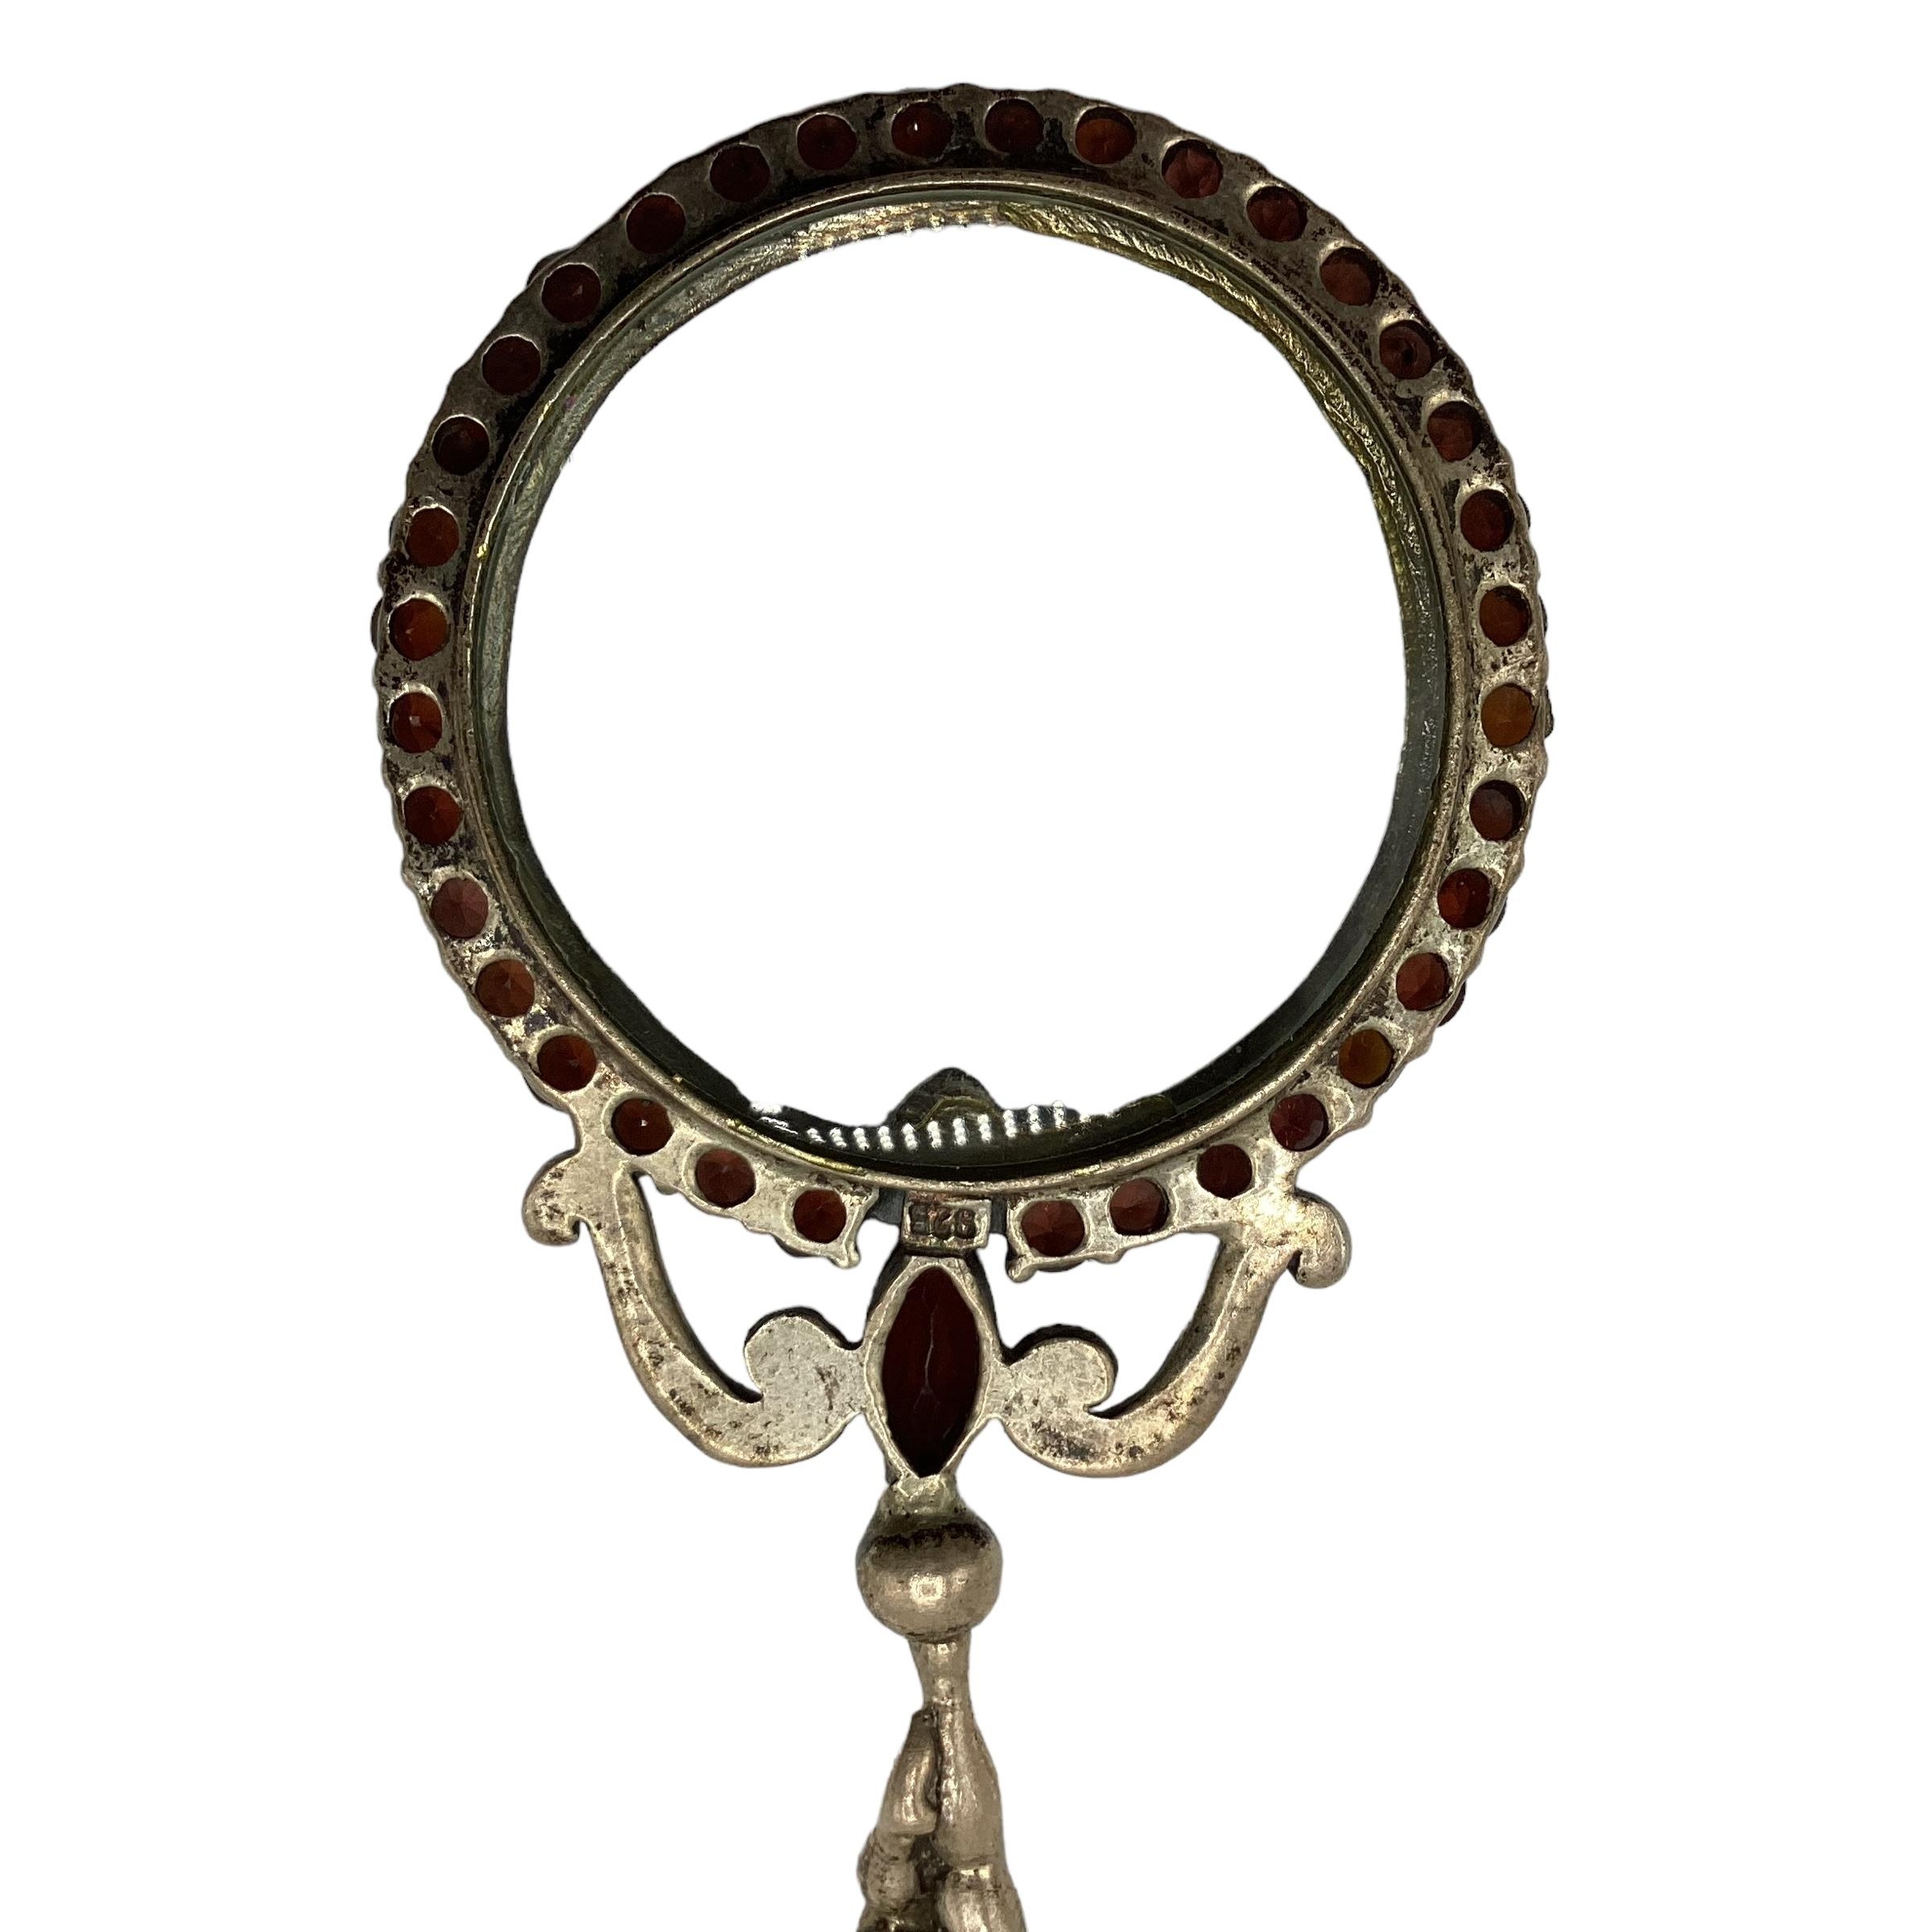 A 924 silver magnifying glass with cast putti handle and red garnet surround. - Image 2 of 4